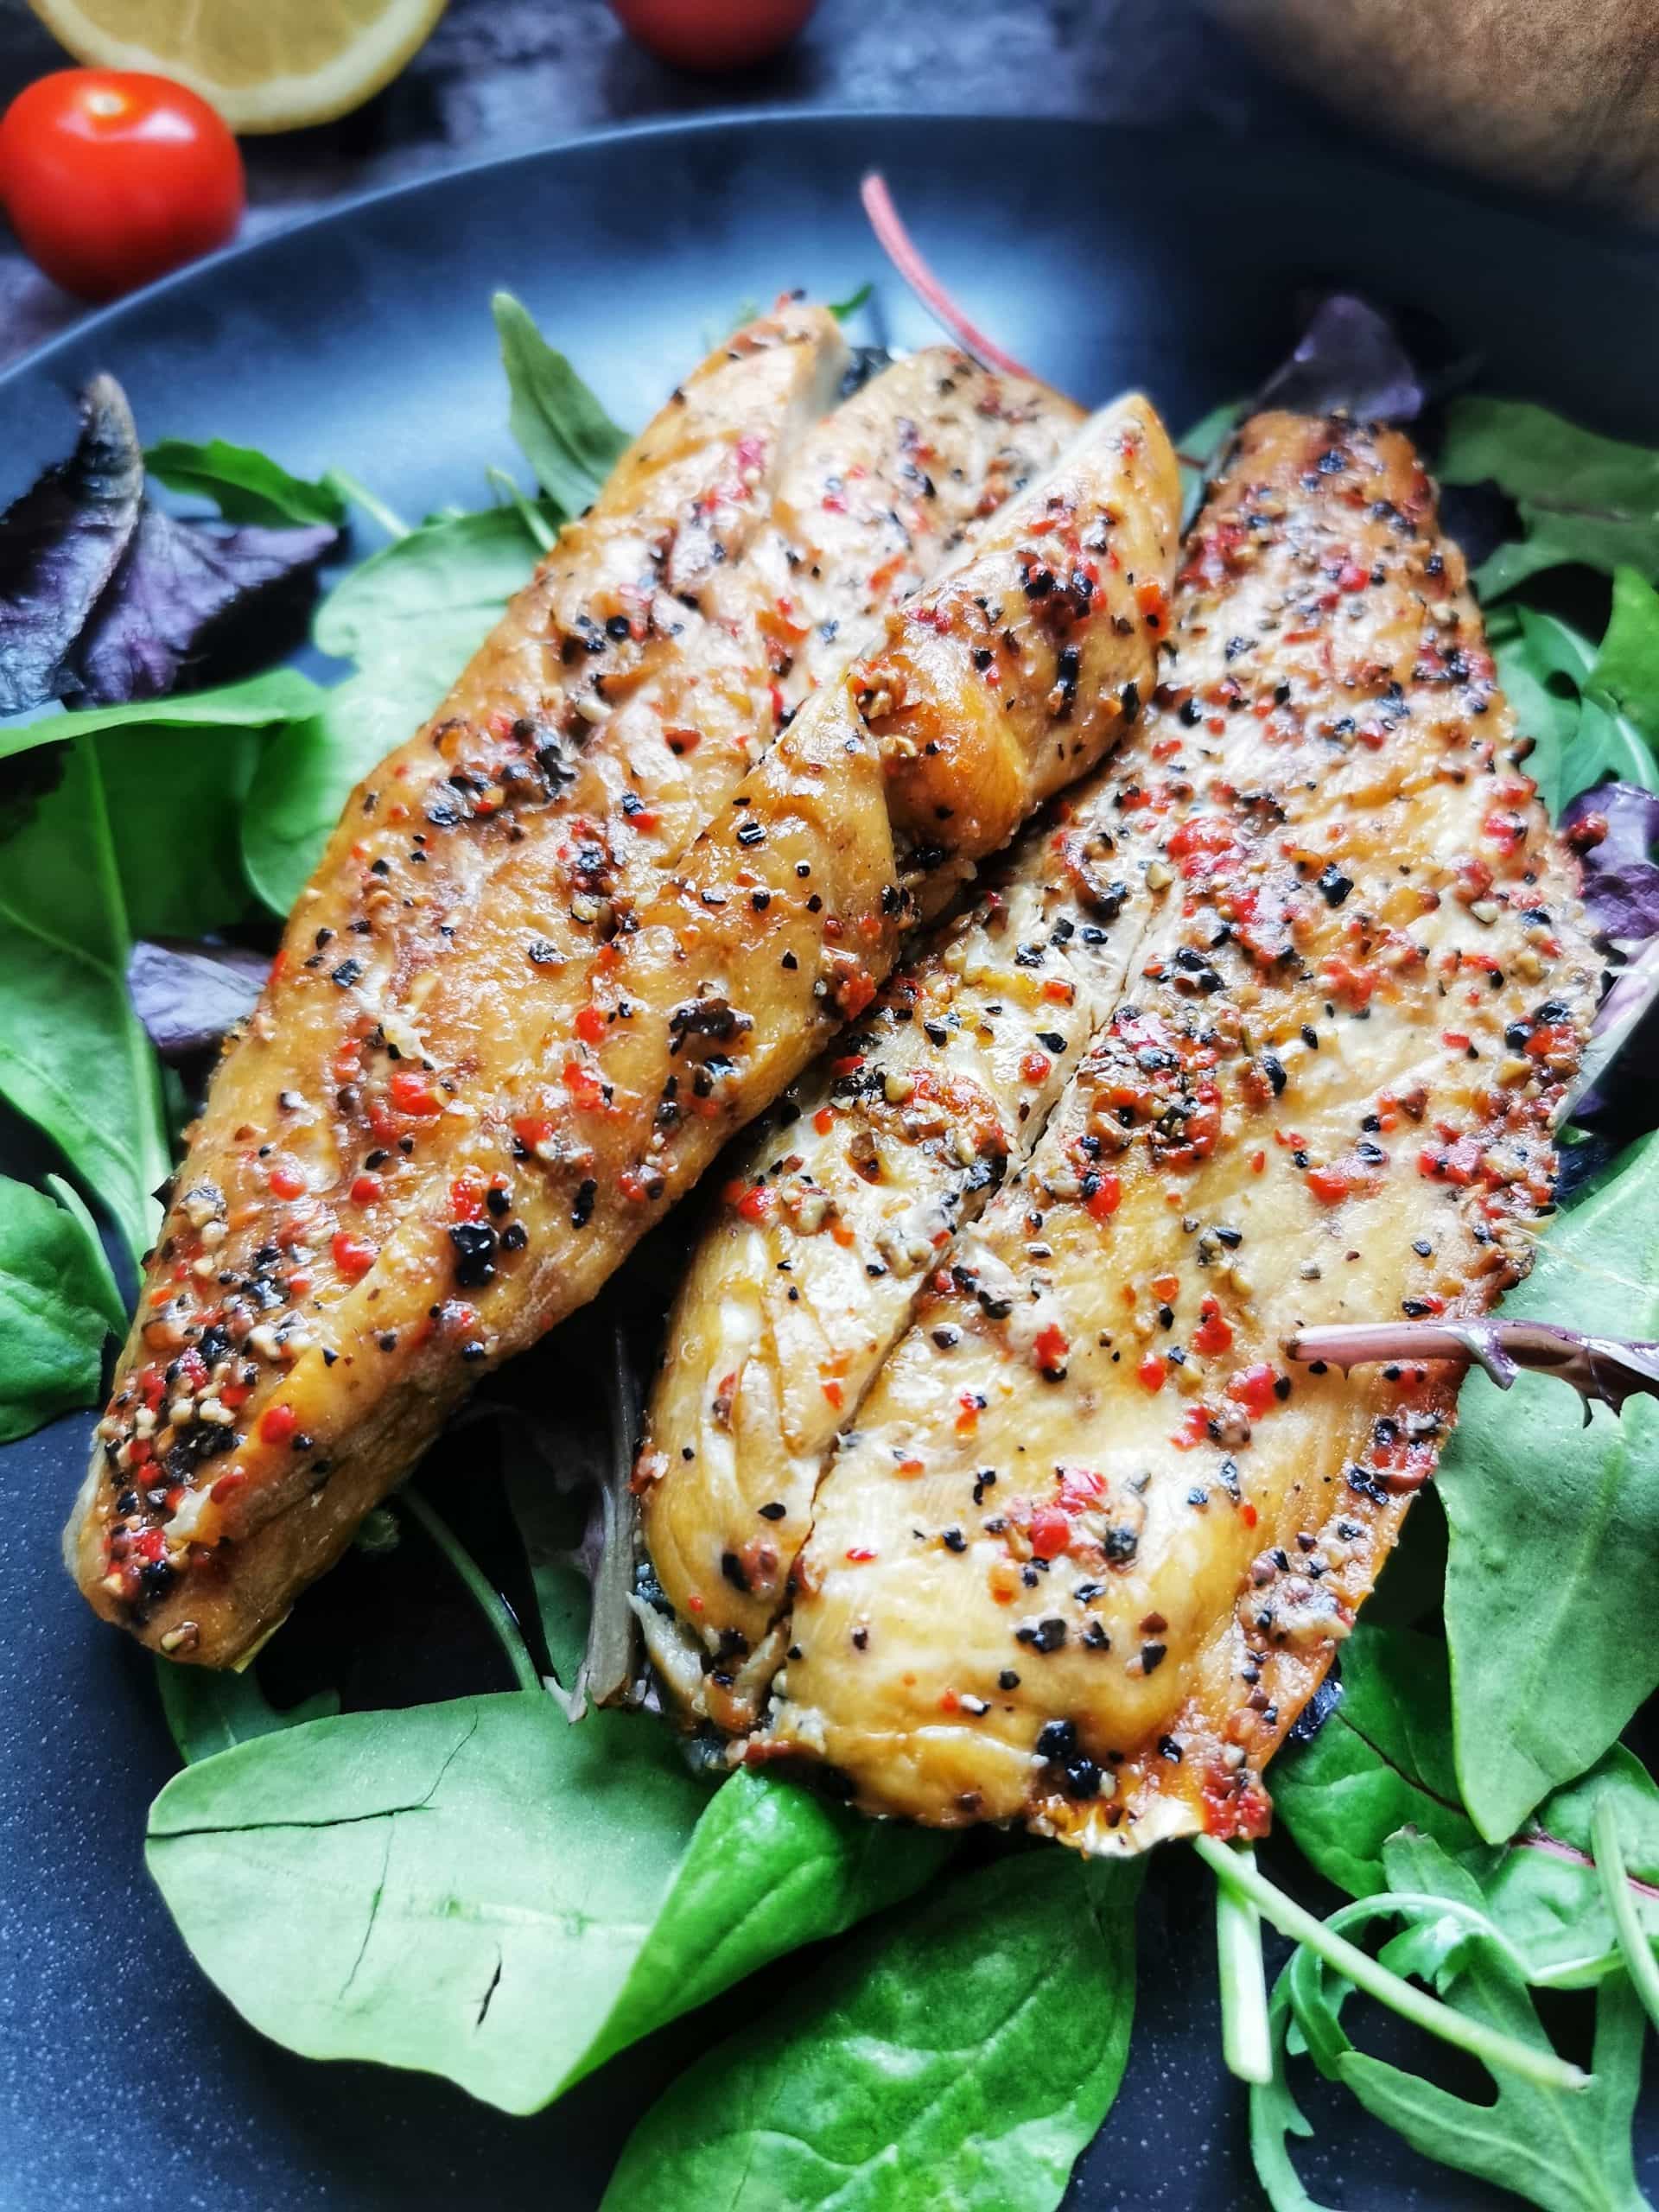 Two peppered mackerel fillets and salad leaves in a brown wooden bowl